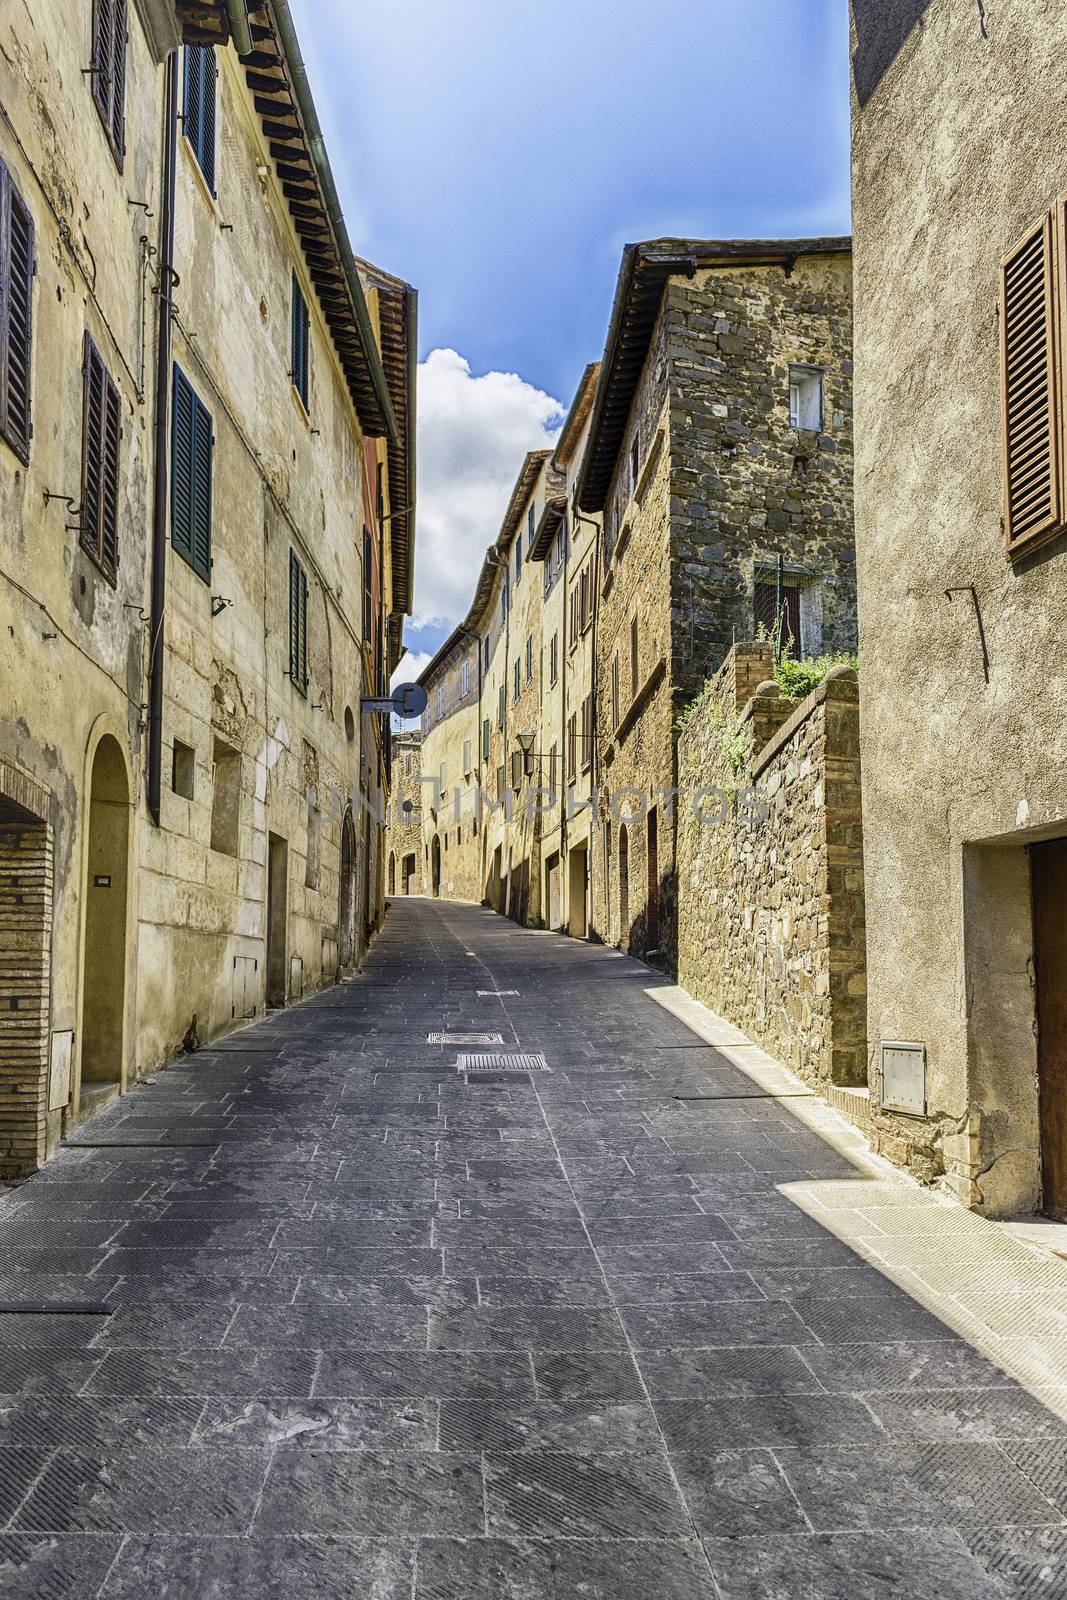 Medieval streets in the town of Montalcino, Tuscany, Italy by marcorubino